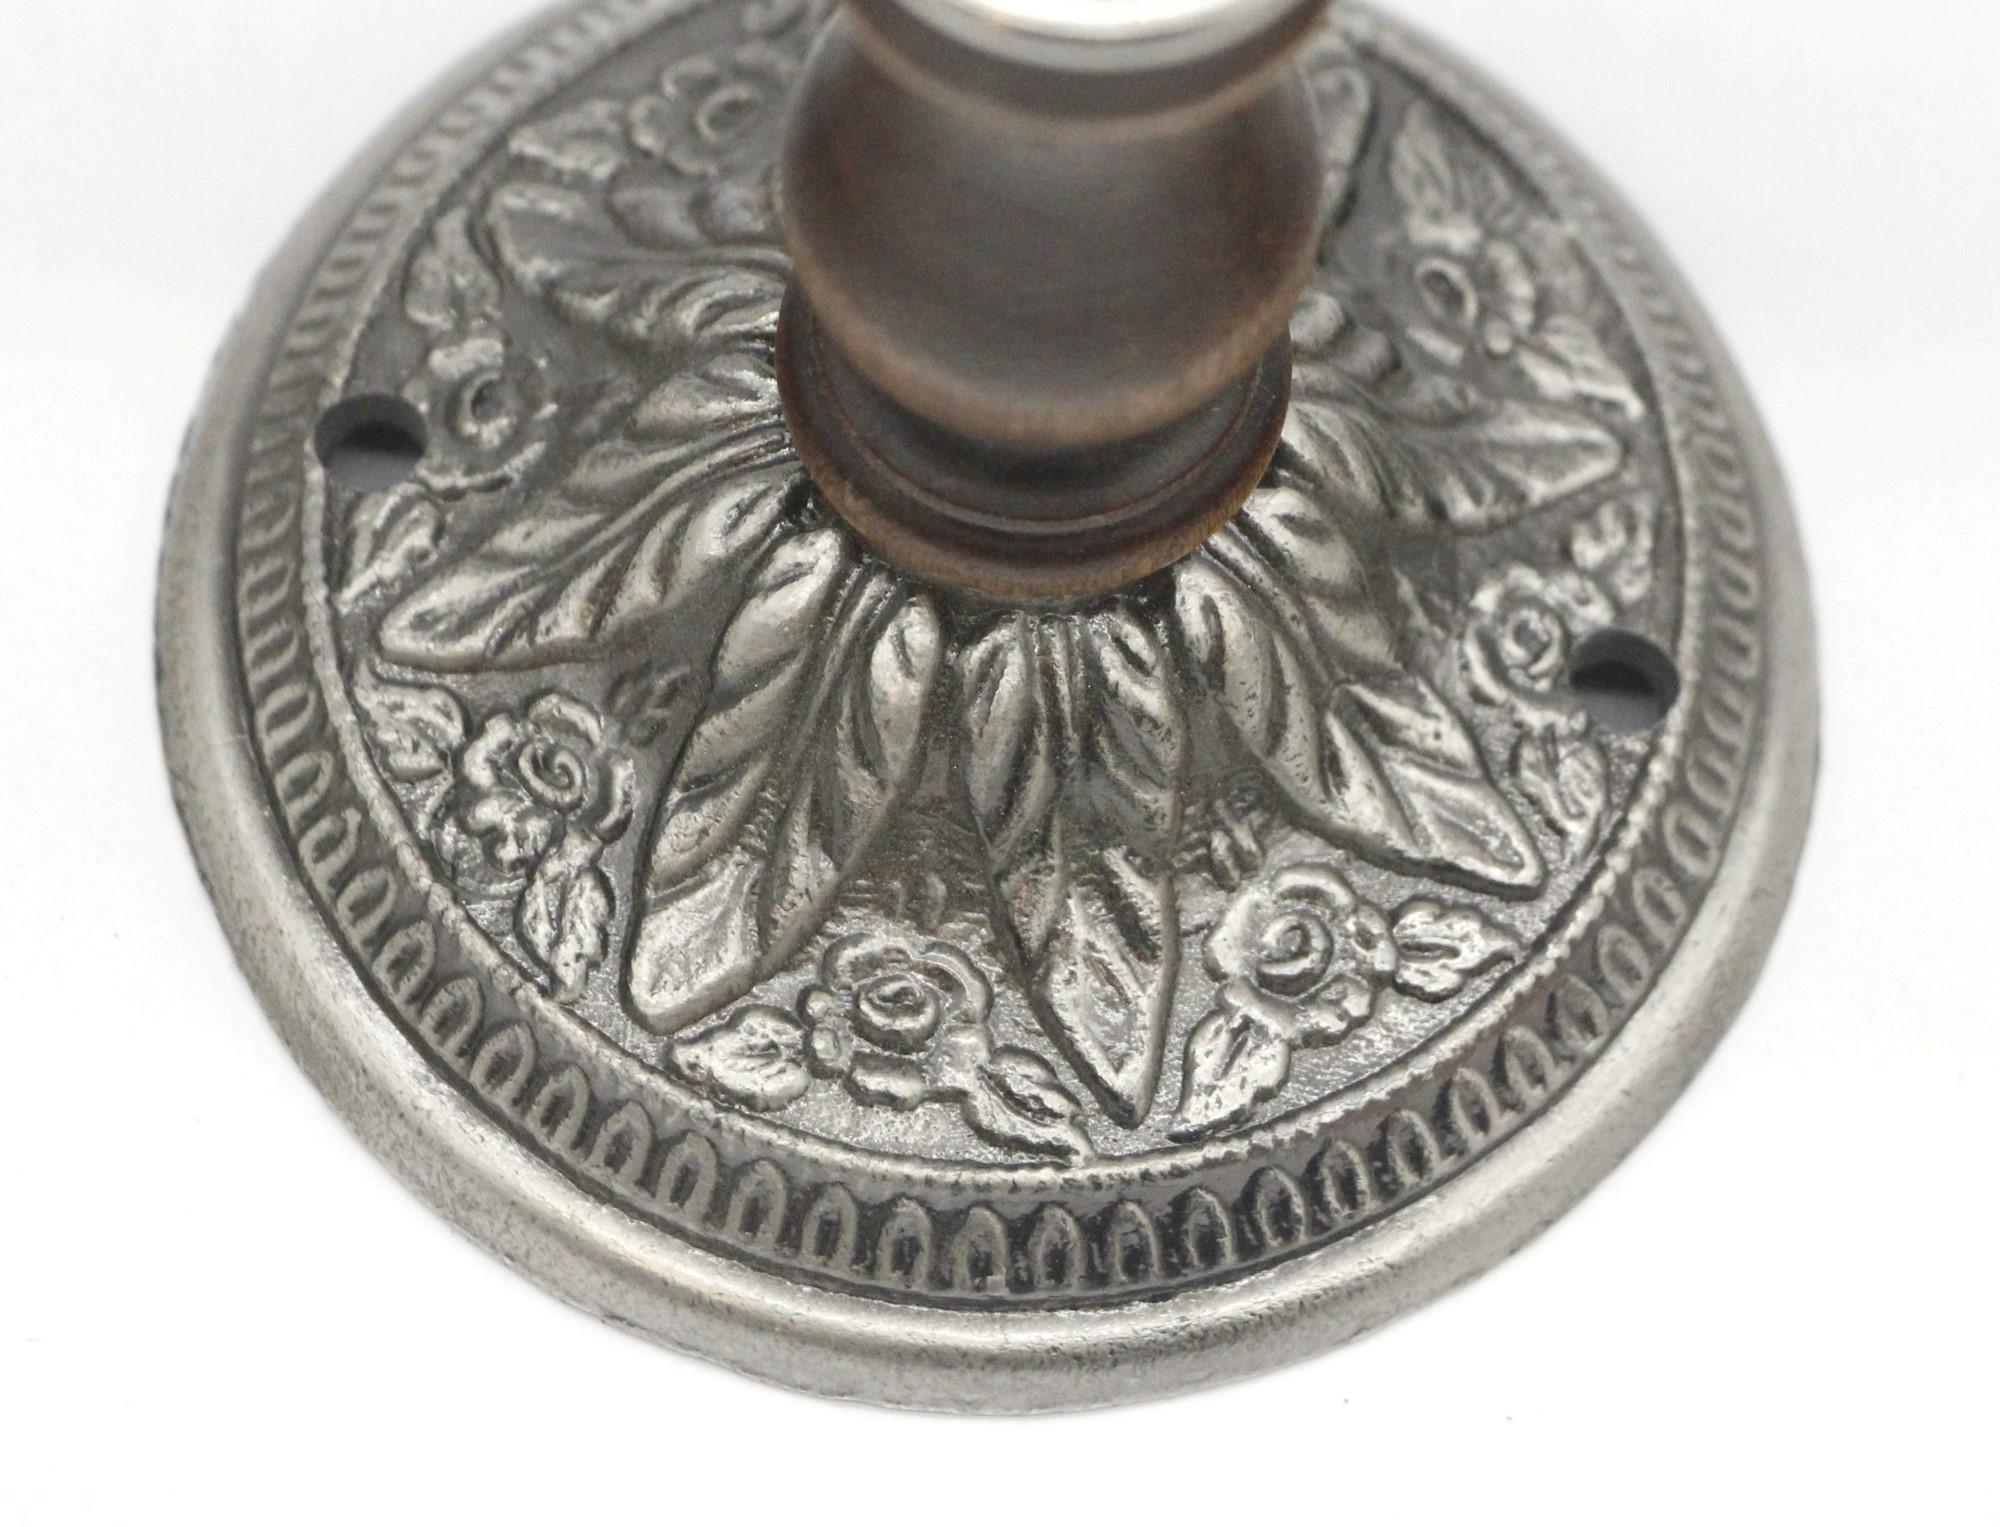 Nickel Plated Brass + Wood Toothbrush Cup Wall Holder with a Floral Design 4